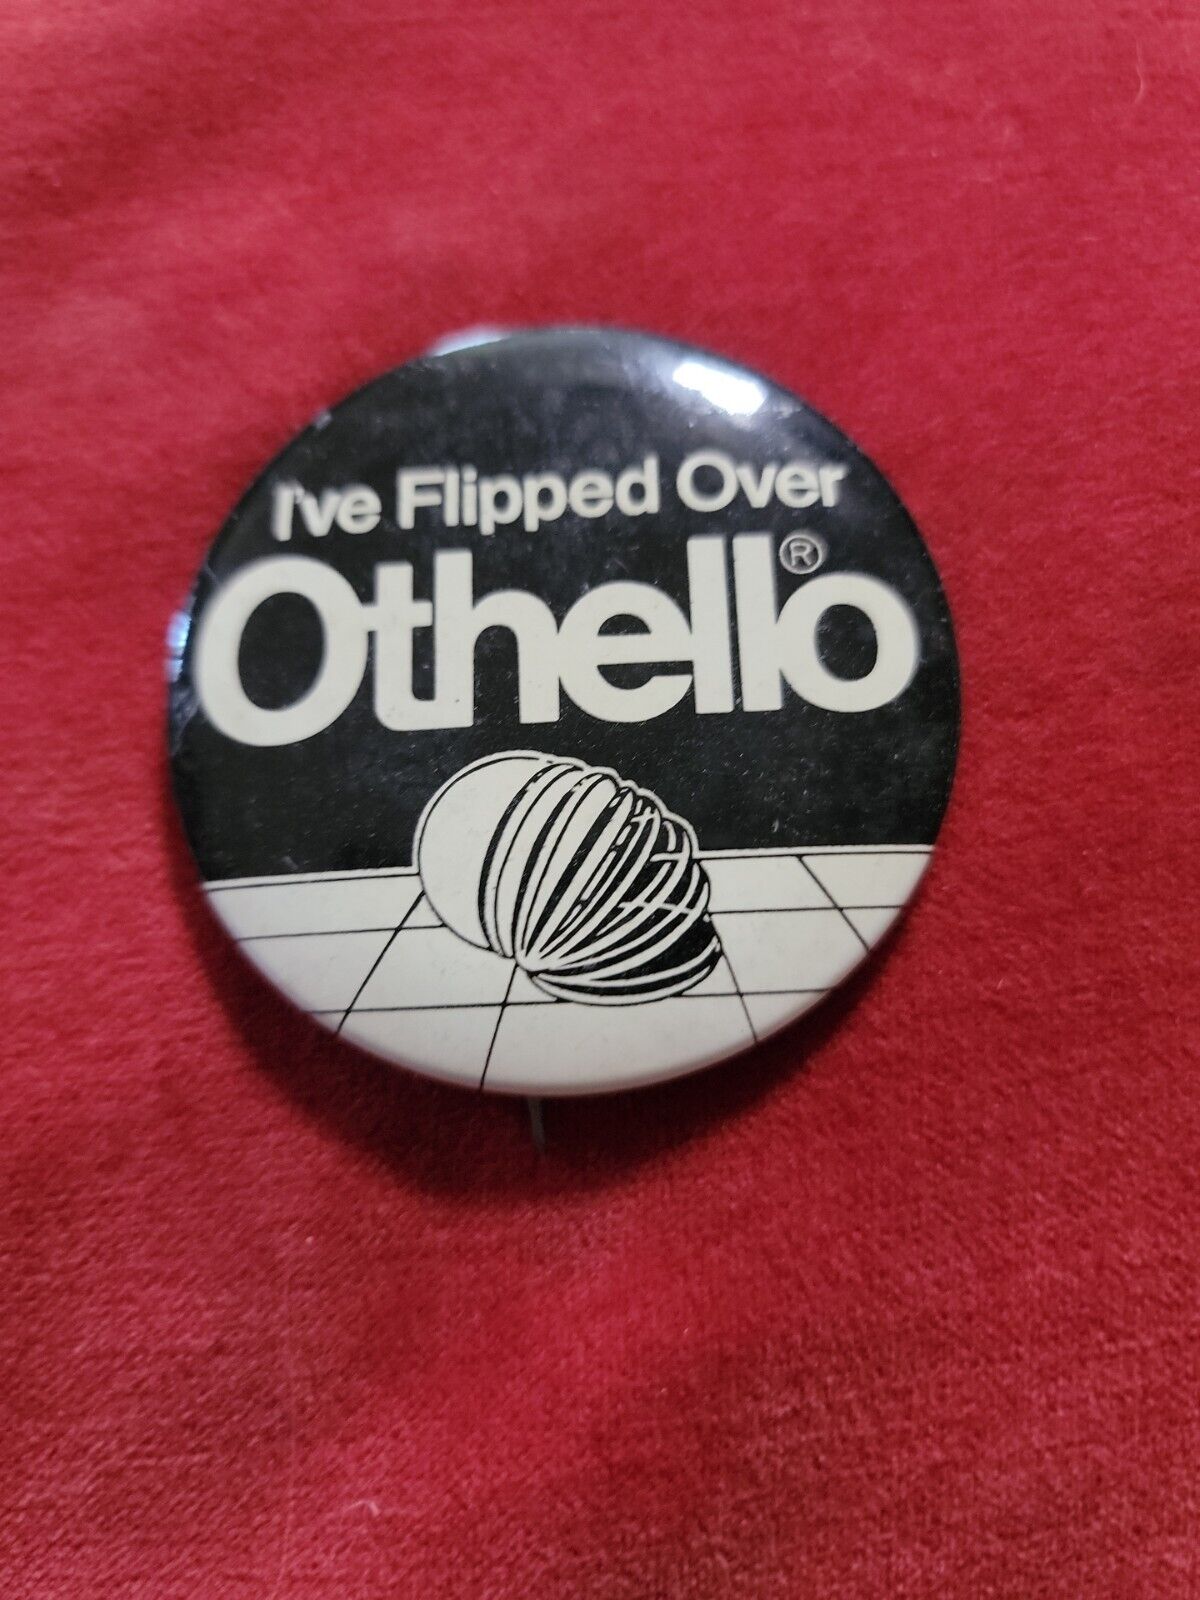 VINTAGE I'VE FLIPPED OVER OTHELLO BUTTON